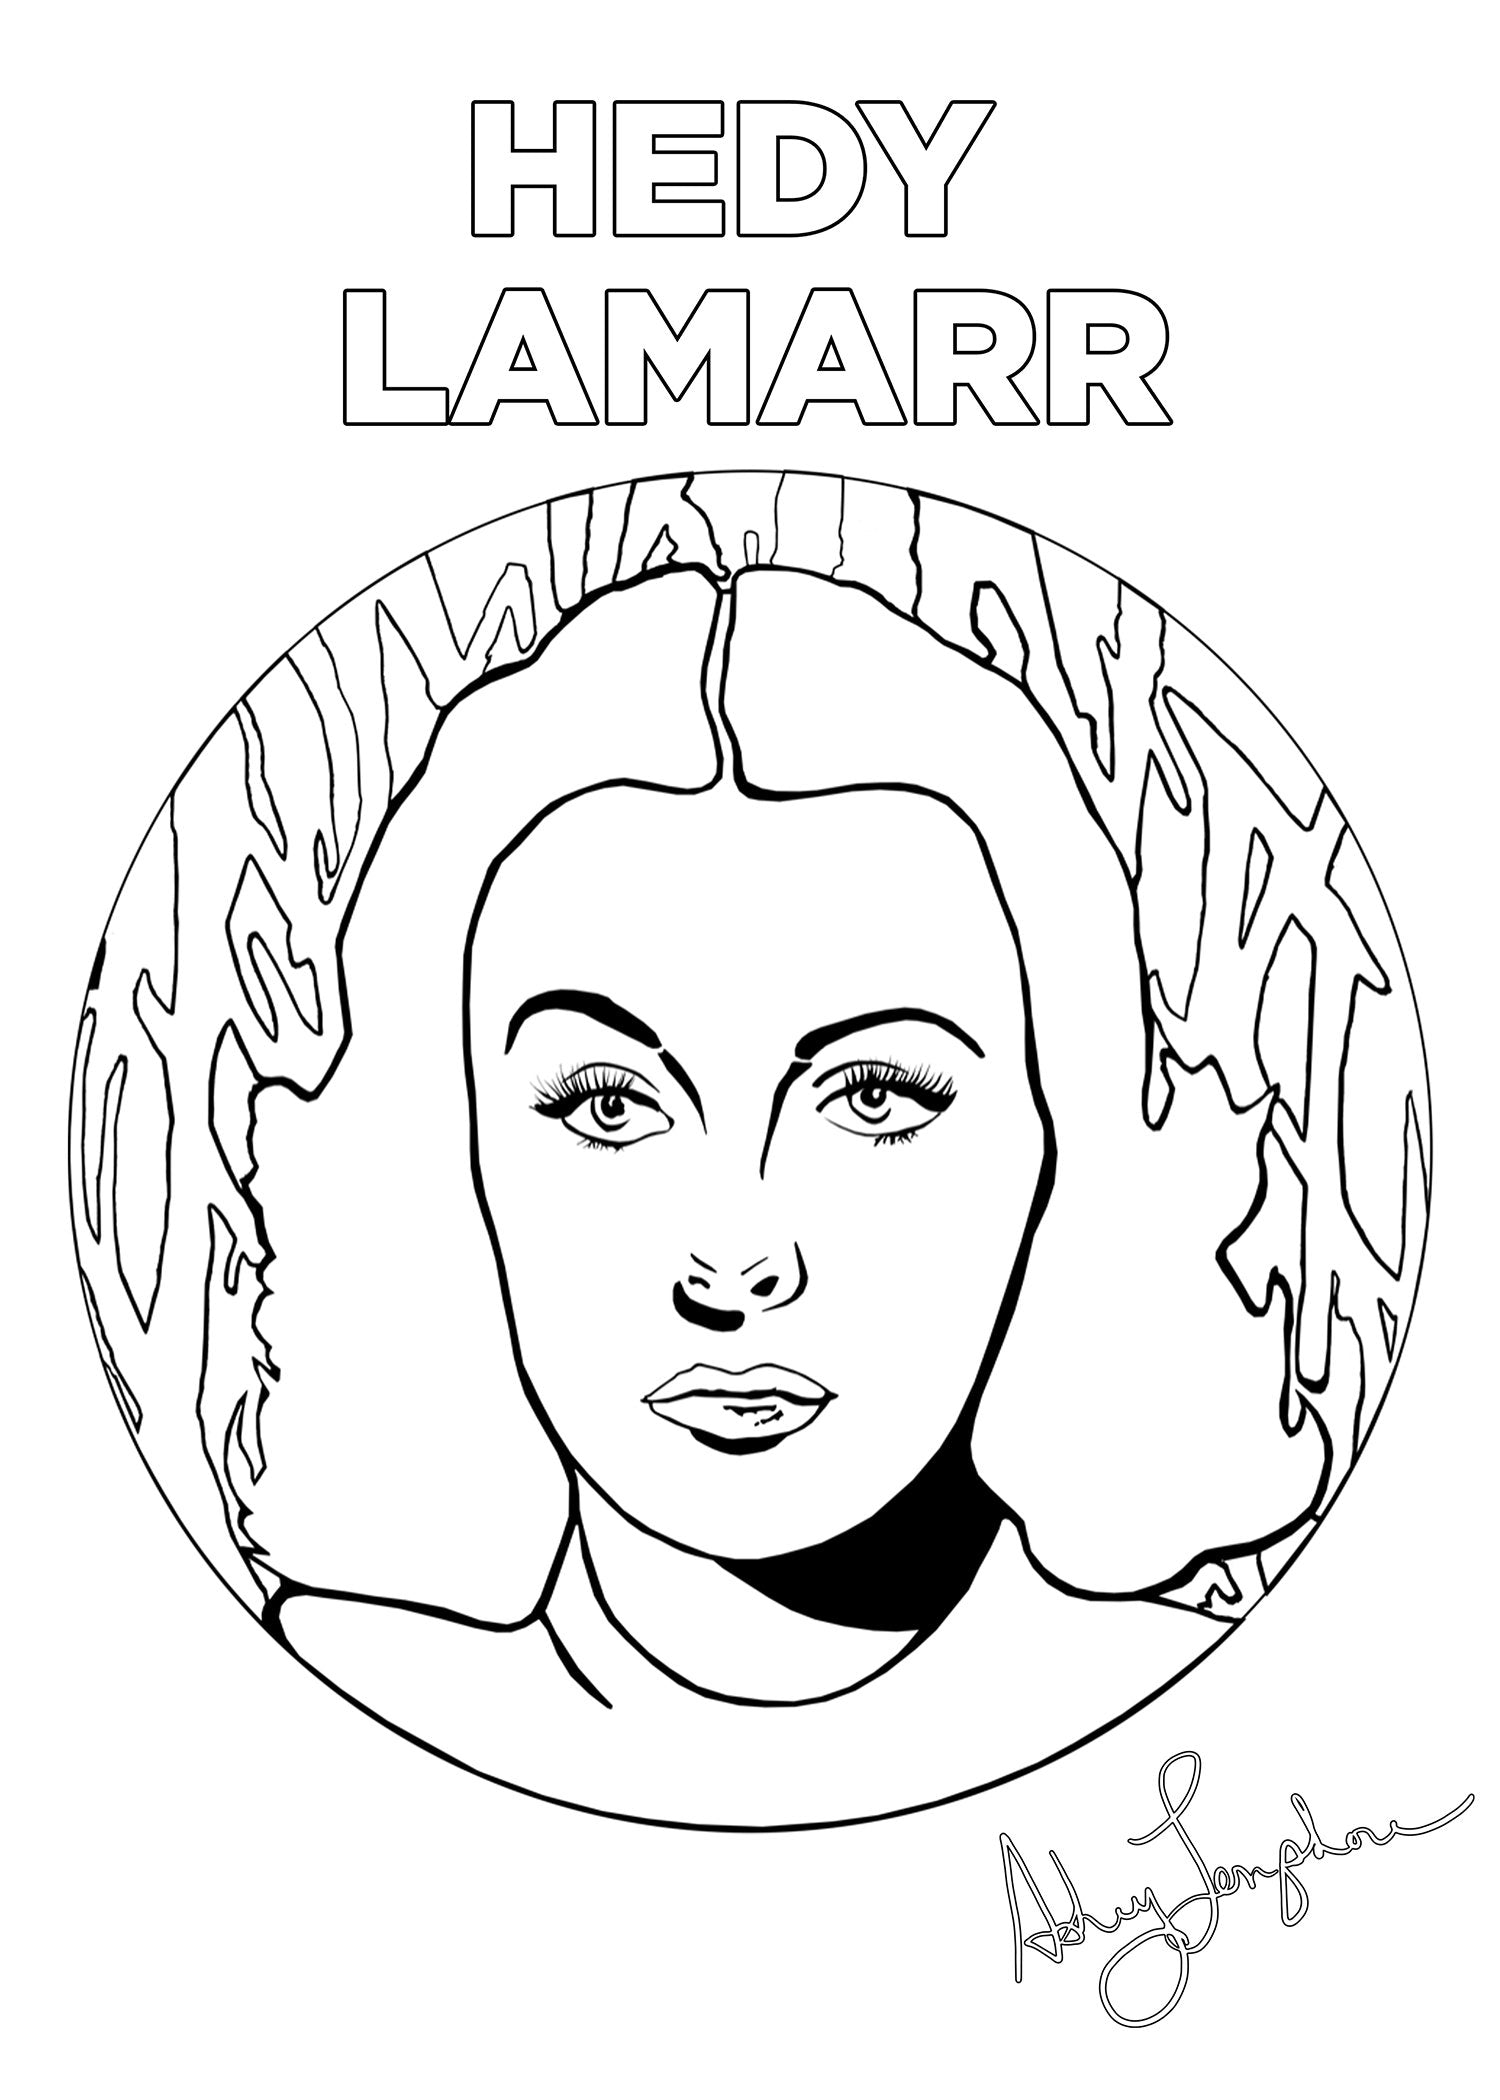 Ashley Longshore coloring pages featuring Hedy Lamarr.